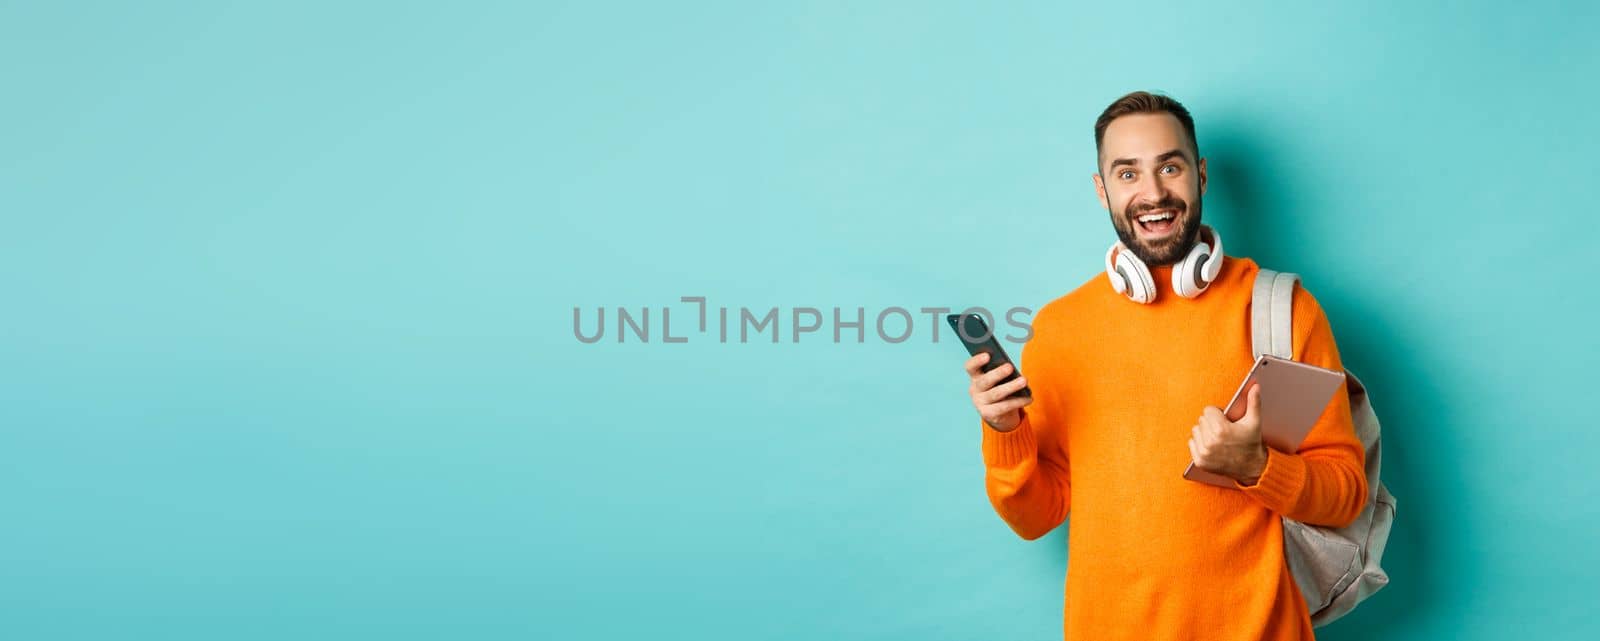 Handsome man student with headphones and backpack, holding digital tablet and smartphone, looking at camera, standing against turquoise background by Benzoix